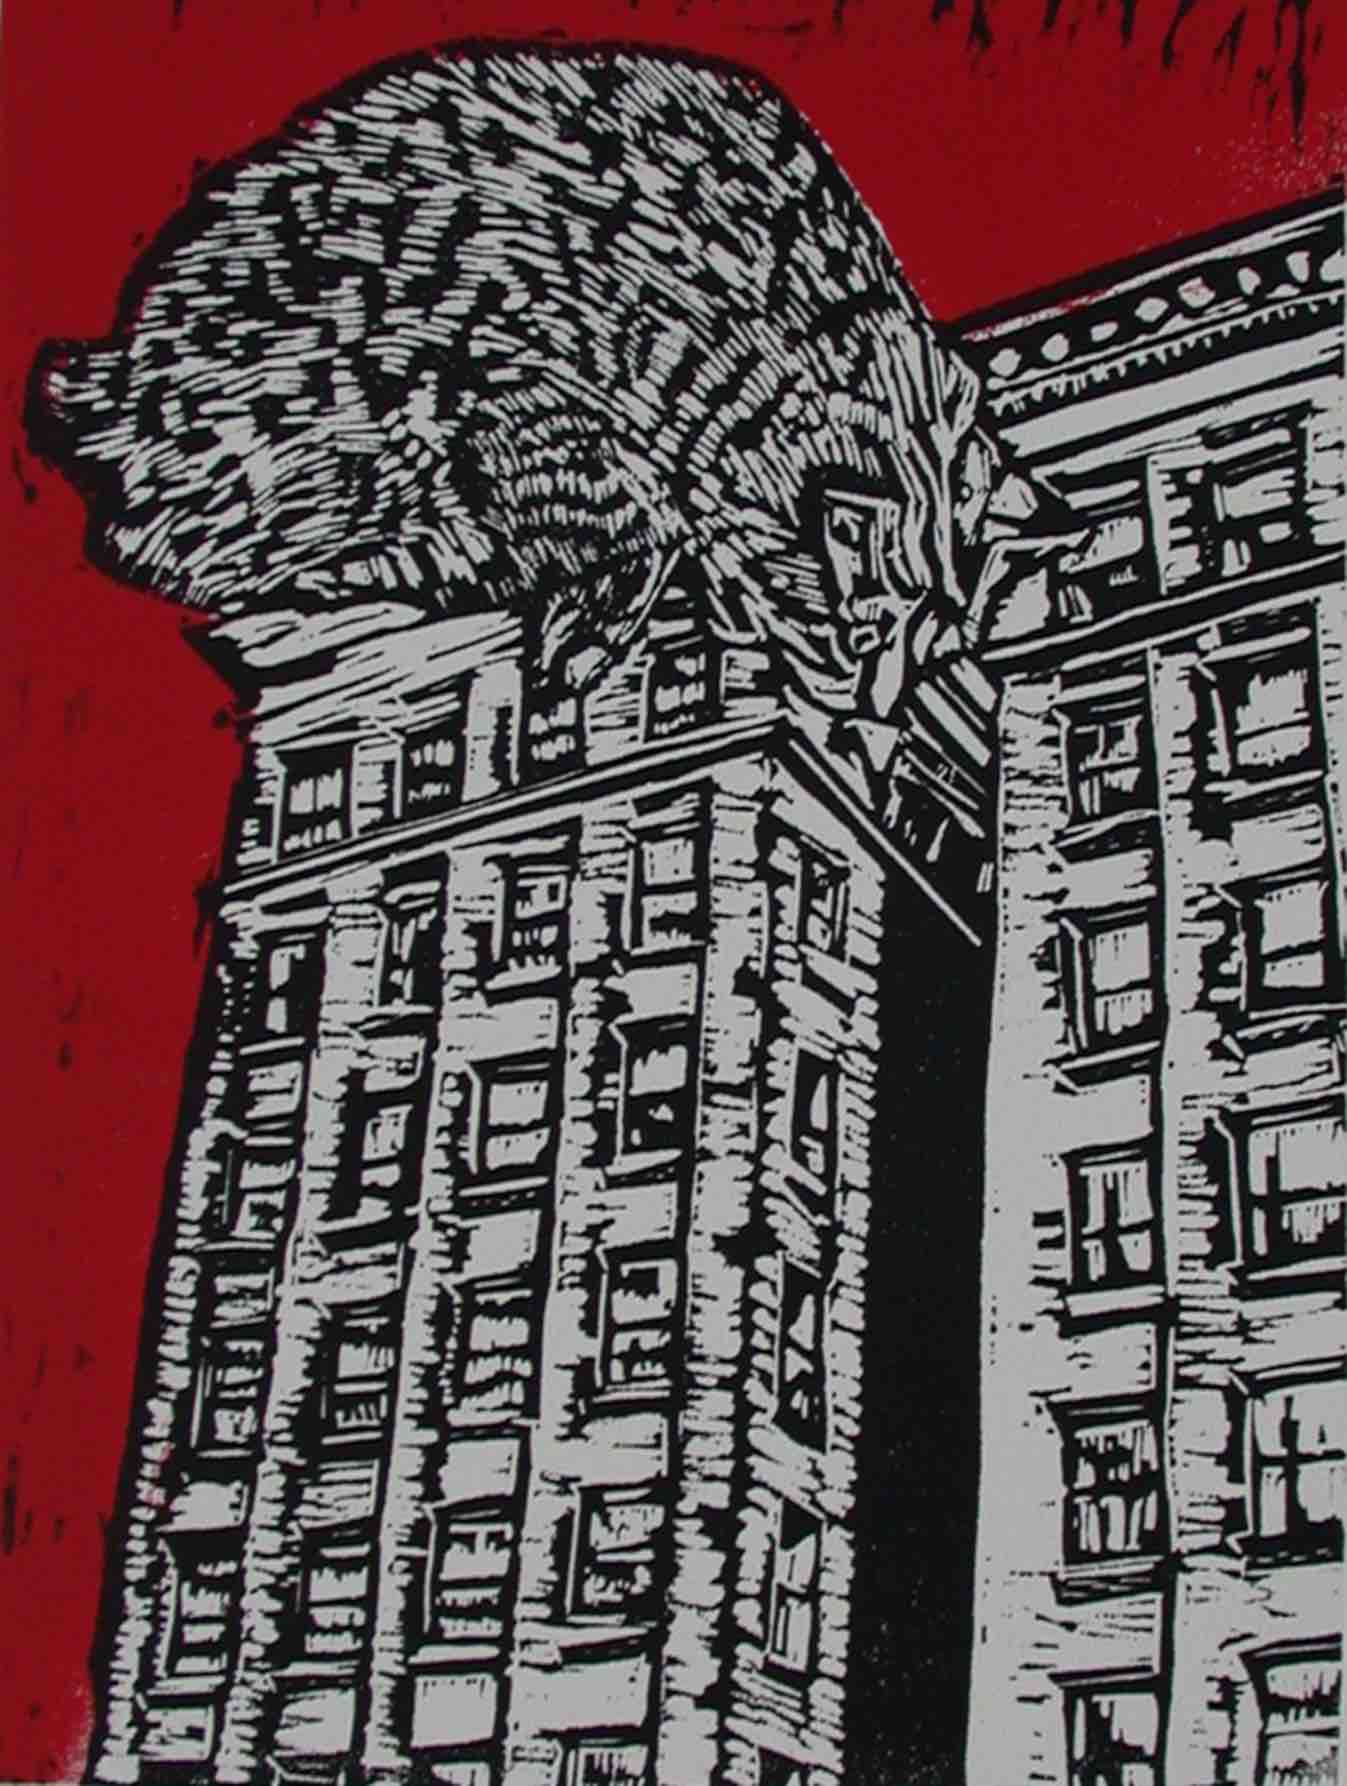 This bold graphic print depicts a gigantic cat, perched atop a towering brick office building, so large that it covers the entire roof. The cat stares intently towards the ground, eyes wide. The sky is deep red. The cat and buildings are black on grey.